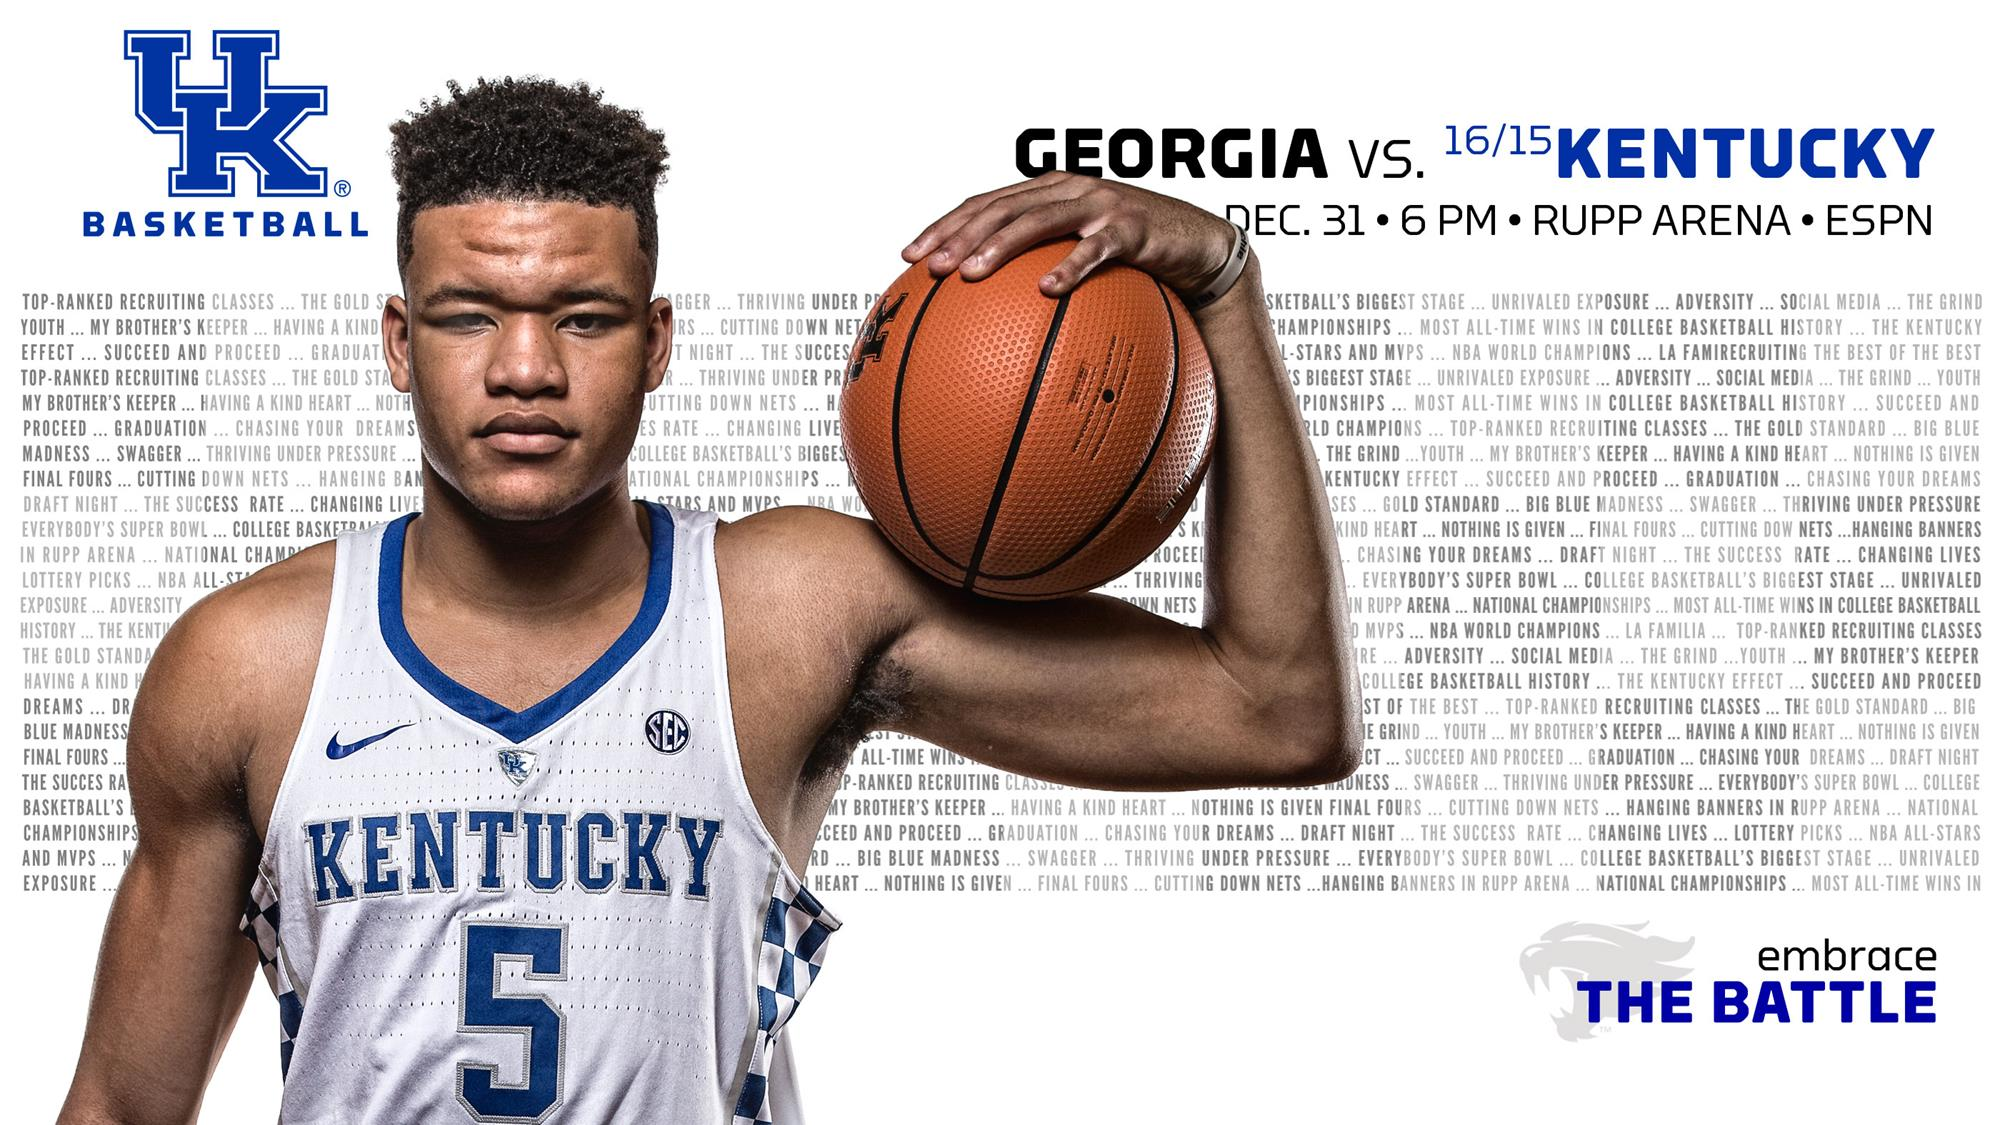 Cats out to Prove Progress in SEC Opener